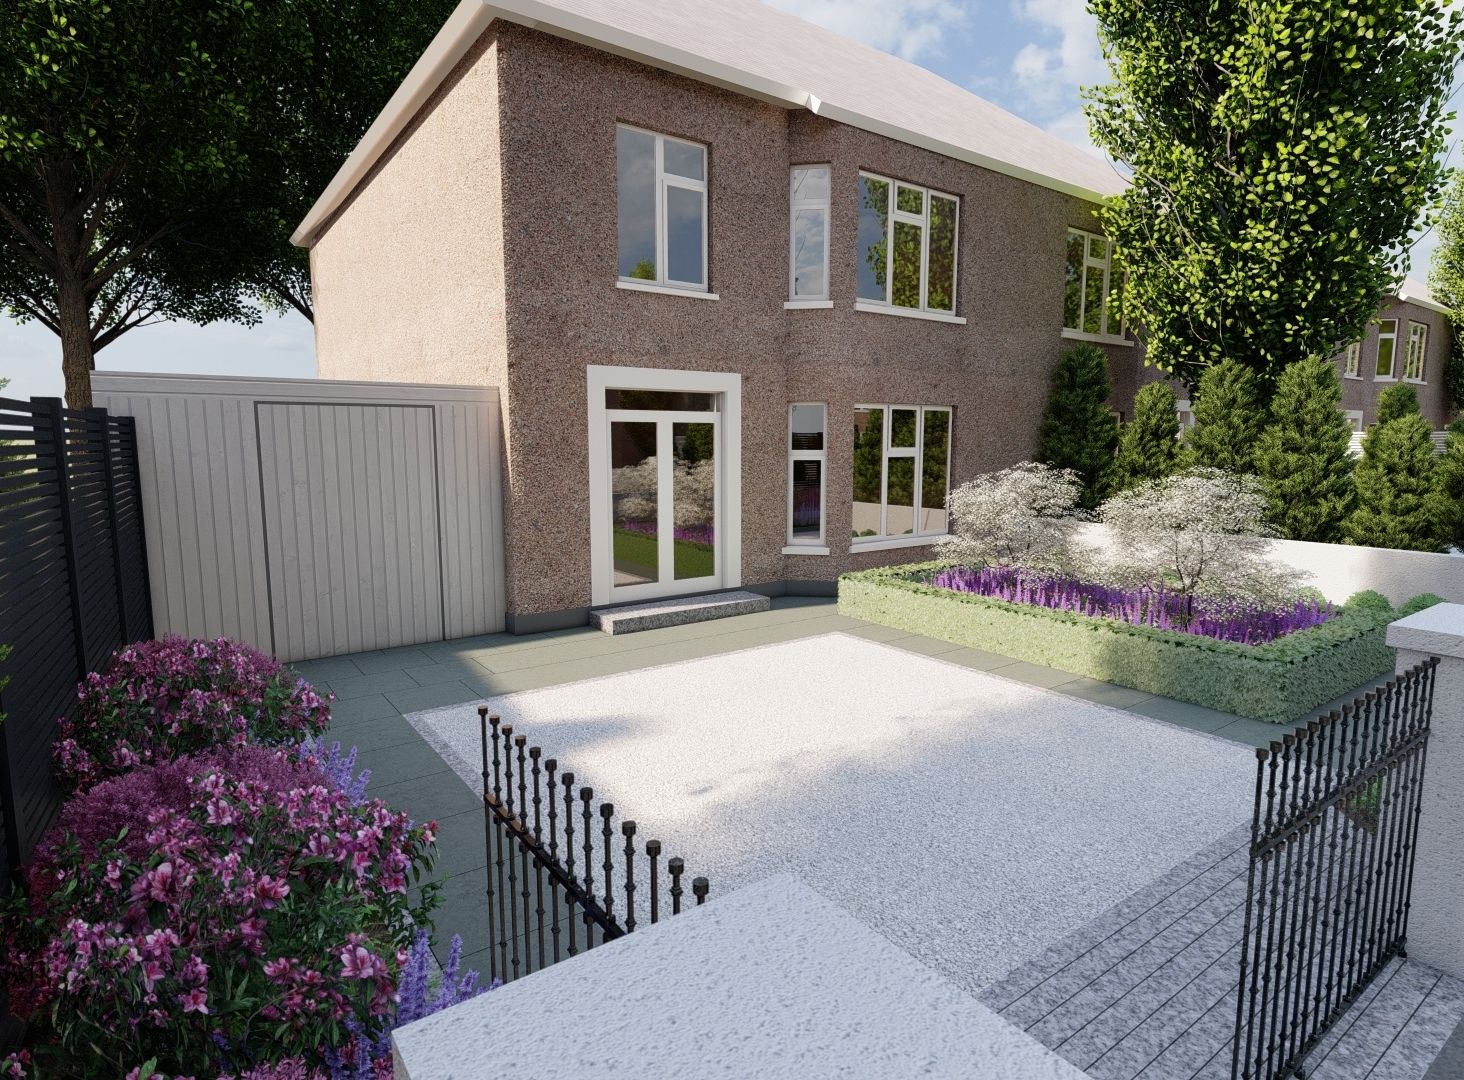 3D Design Visual illustrating a new Driveway layout with feature bed planted with clipped Buxus hedging, a central feature tree and mixed herbaceous flowering plants | Owen Chubb Garden Design, Tel 087-2306128